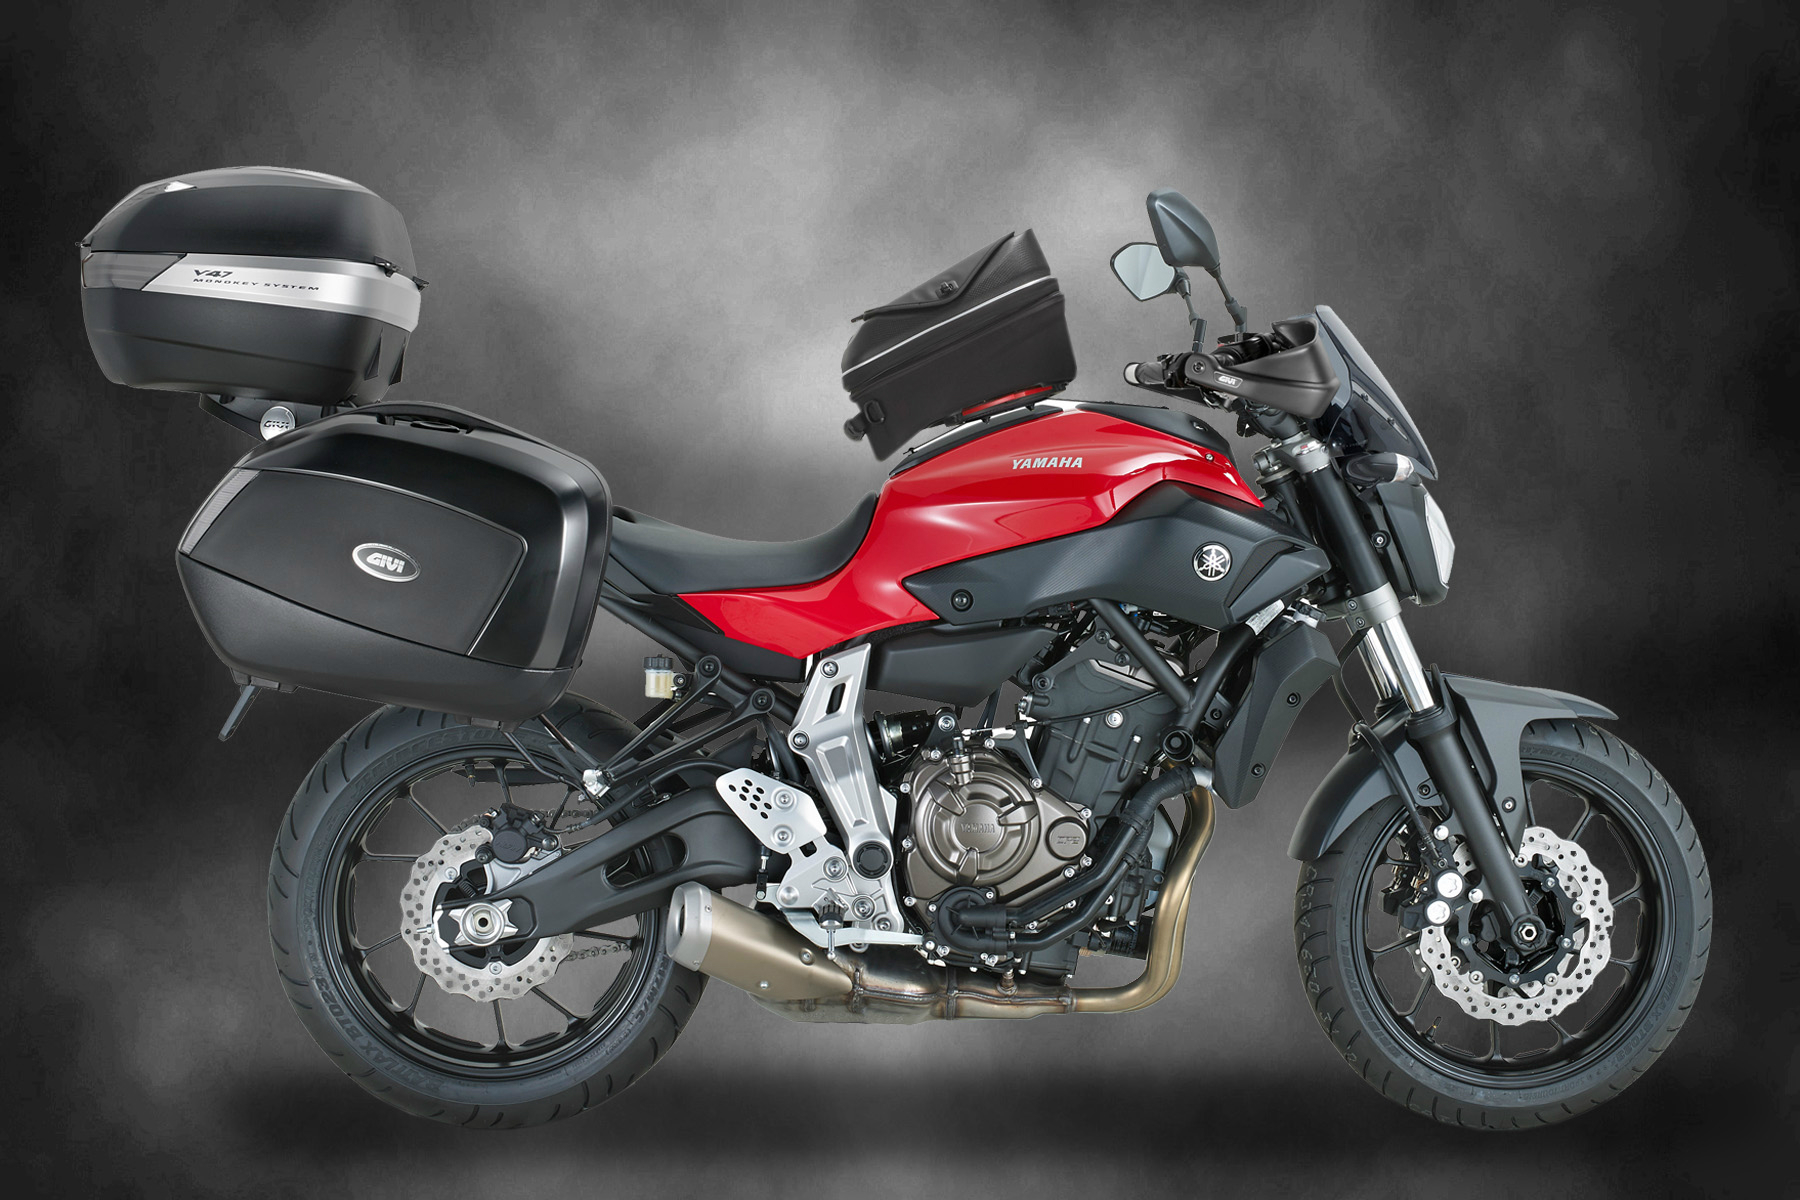 mt-07-gets-the-touring-treatment-by-givi-visordown